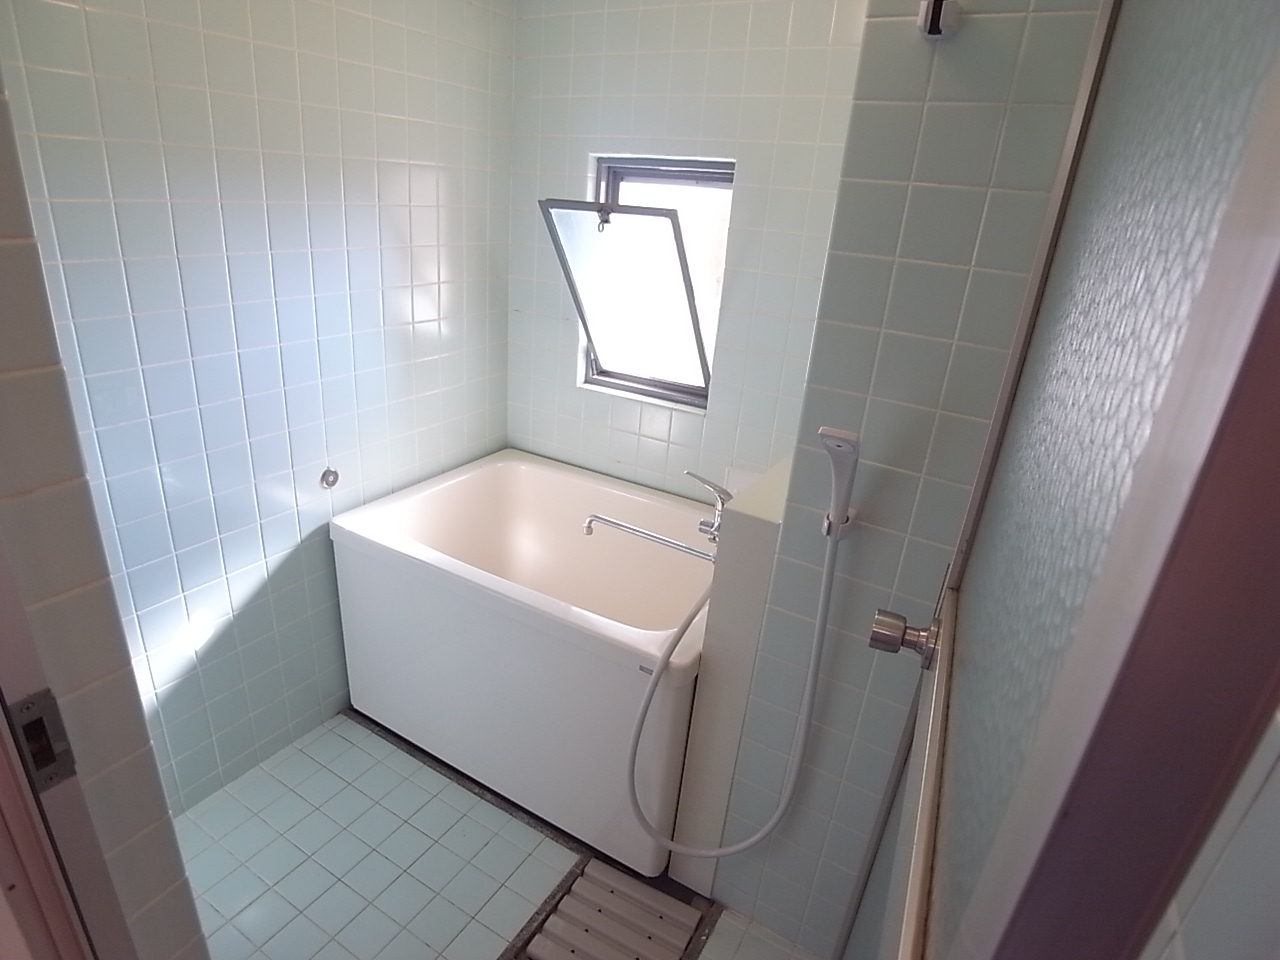 Bath. Bathroom with ventilation is likely to window